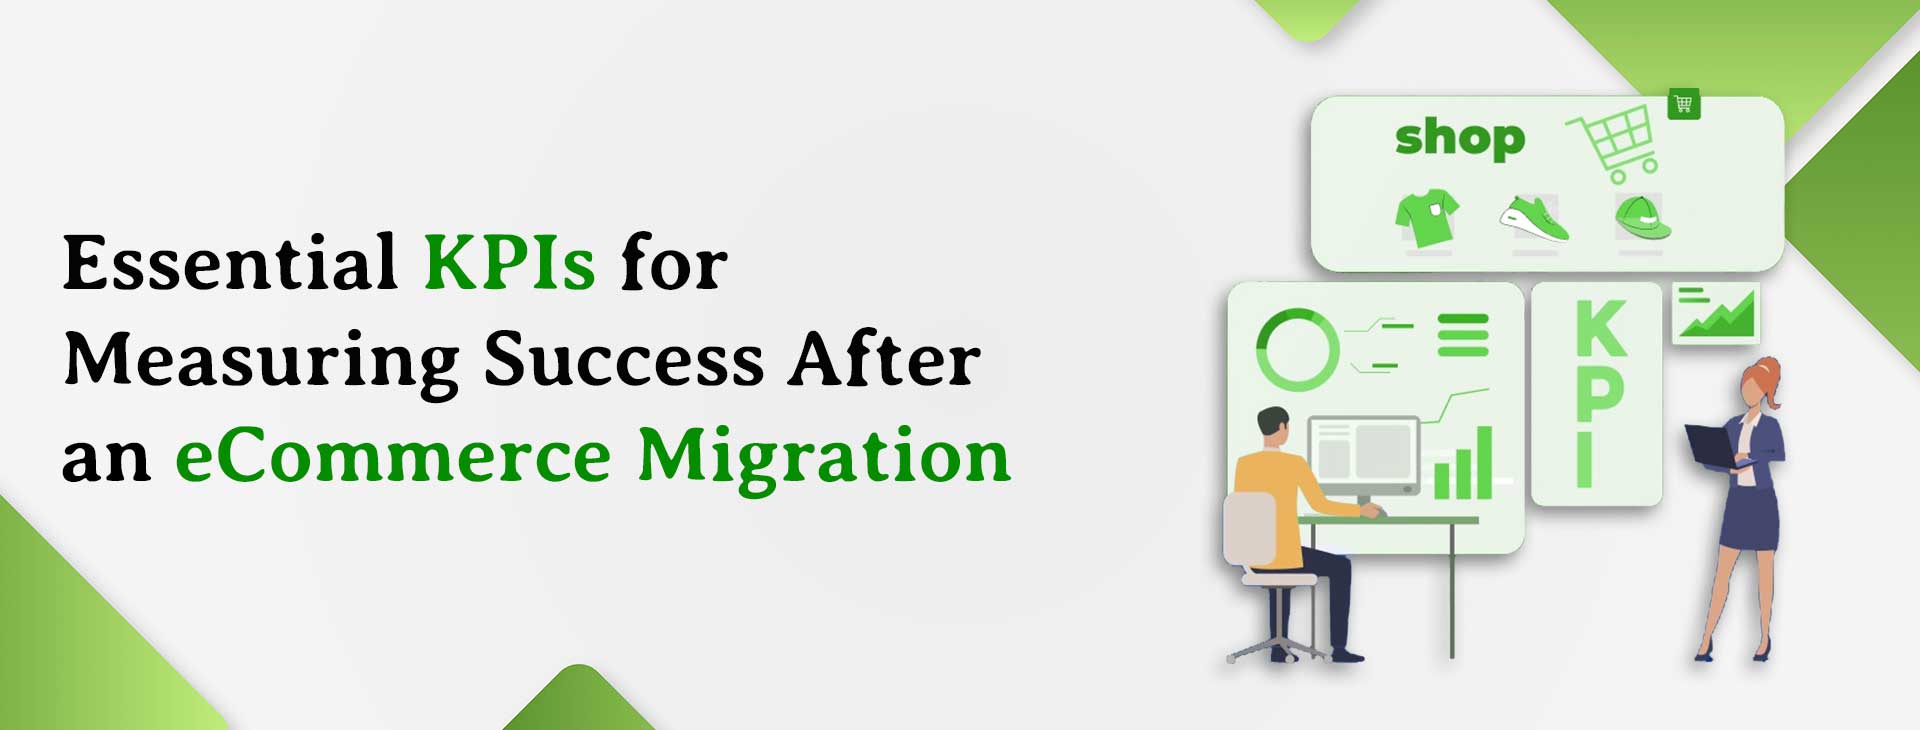 Essential KPIs for Measuring Success After an eCommerce Migration